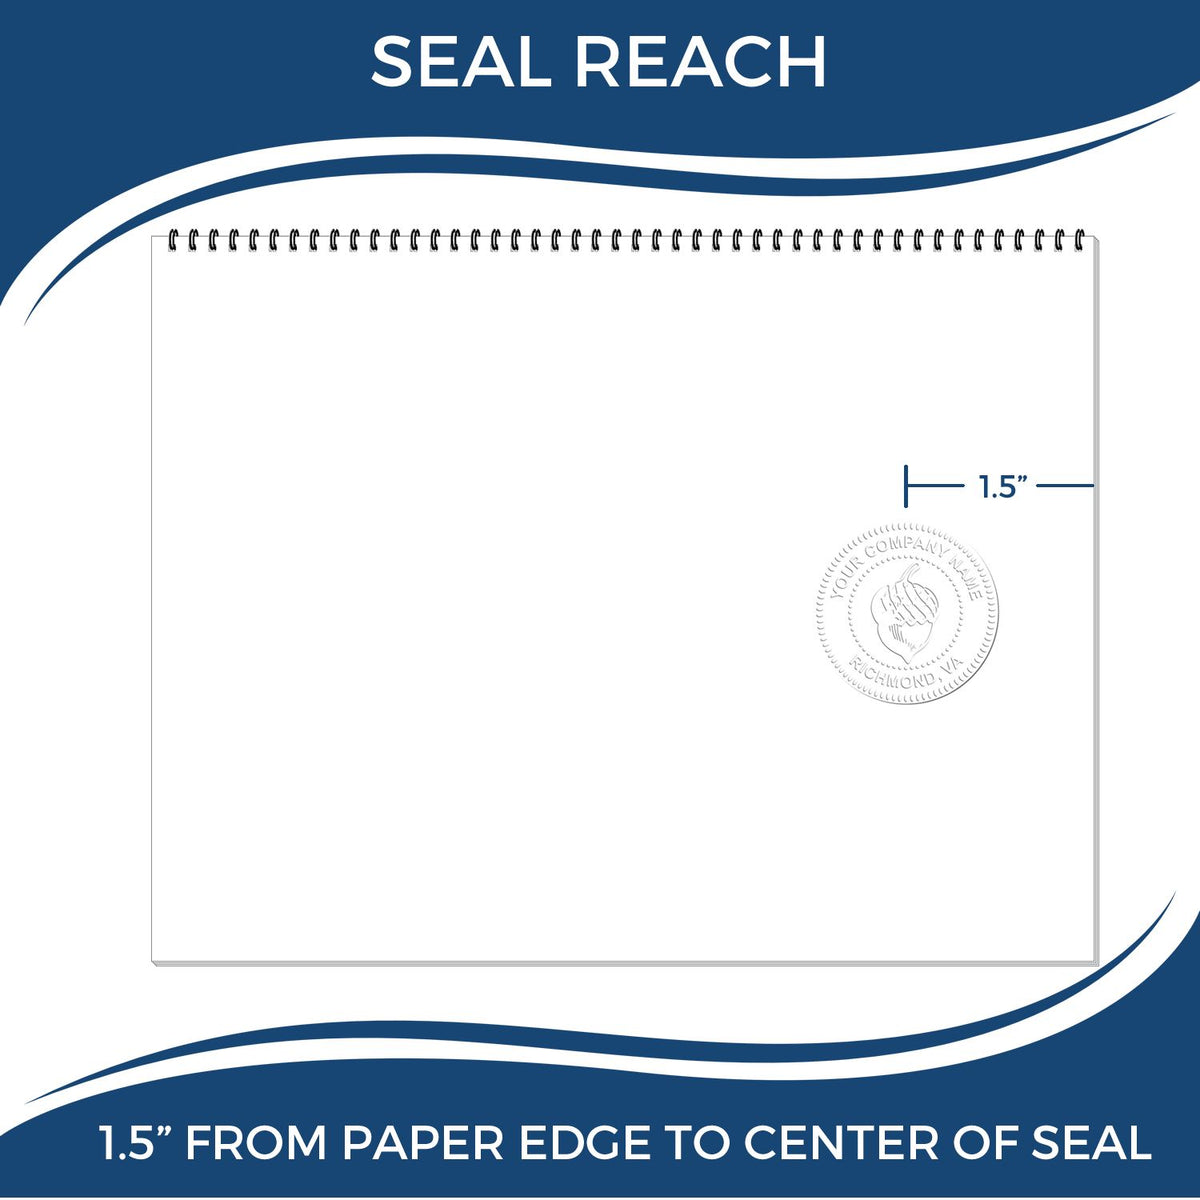 An infographic showing the seal reach which is represented by a ruler and a miniature seal image of the Gift West Virginia Engineer Seal